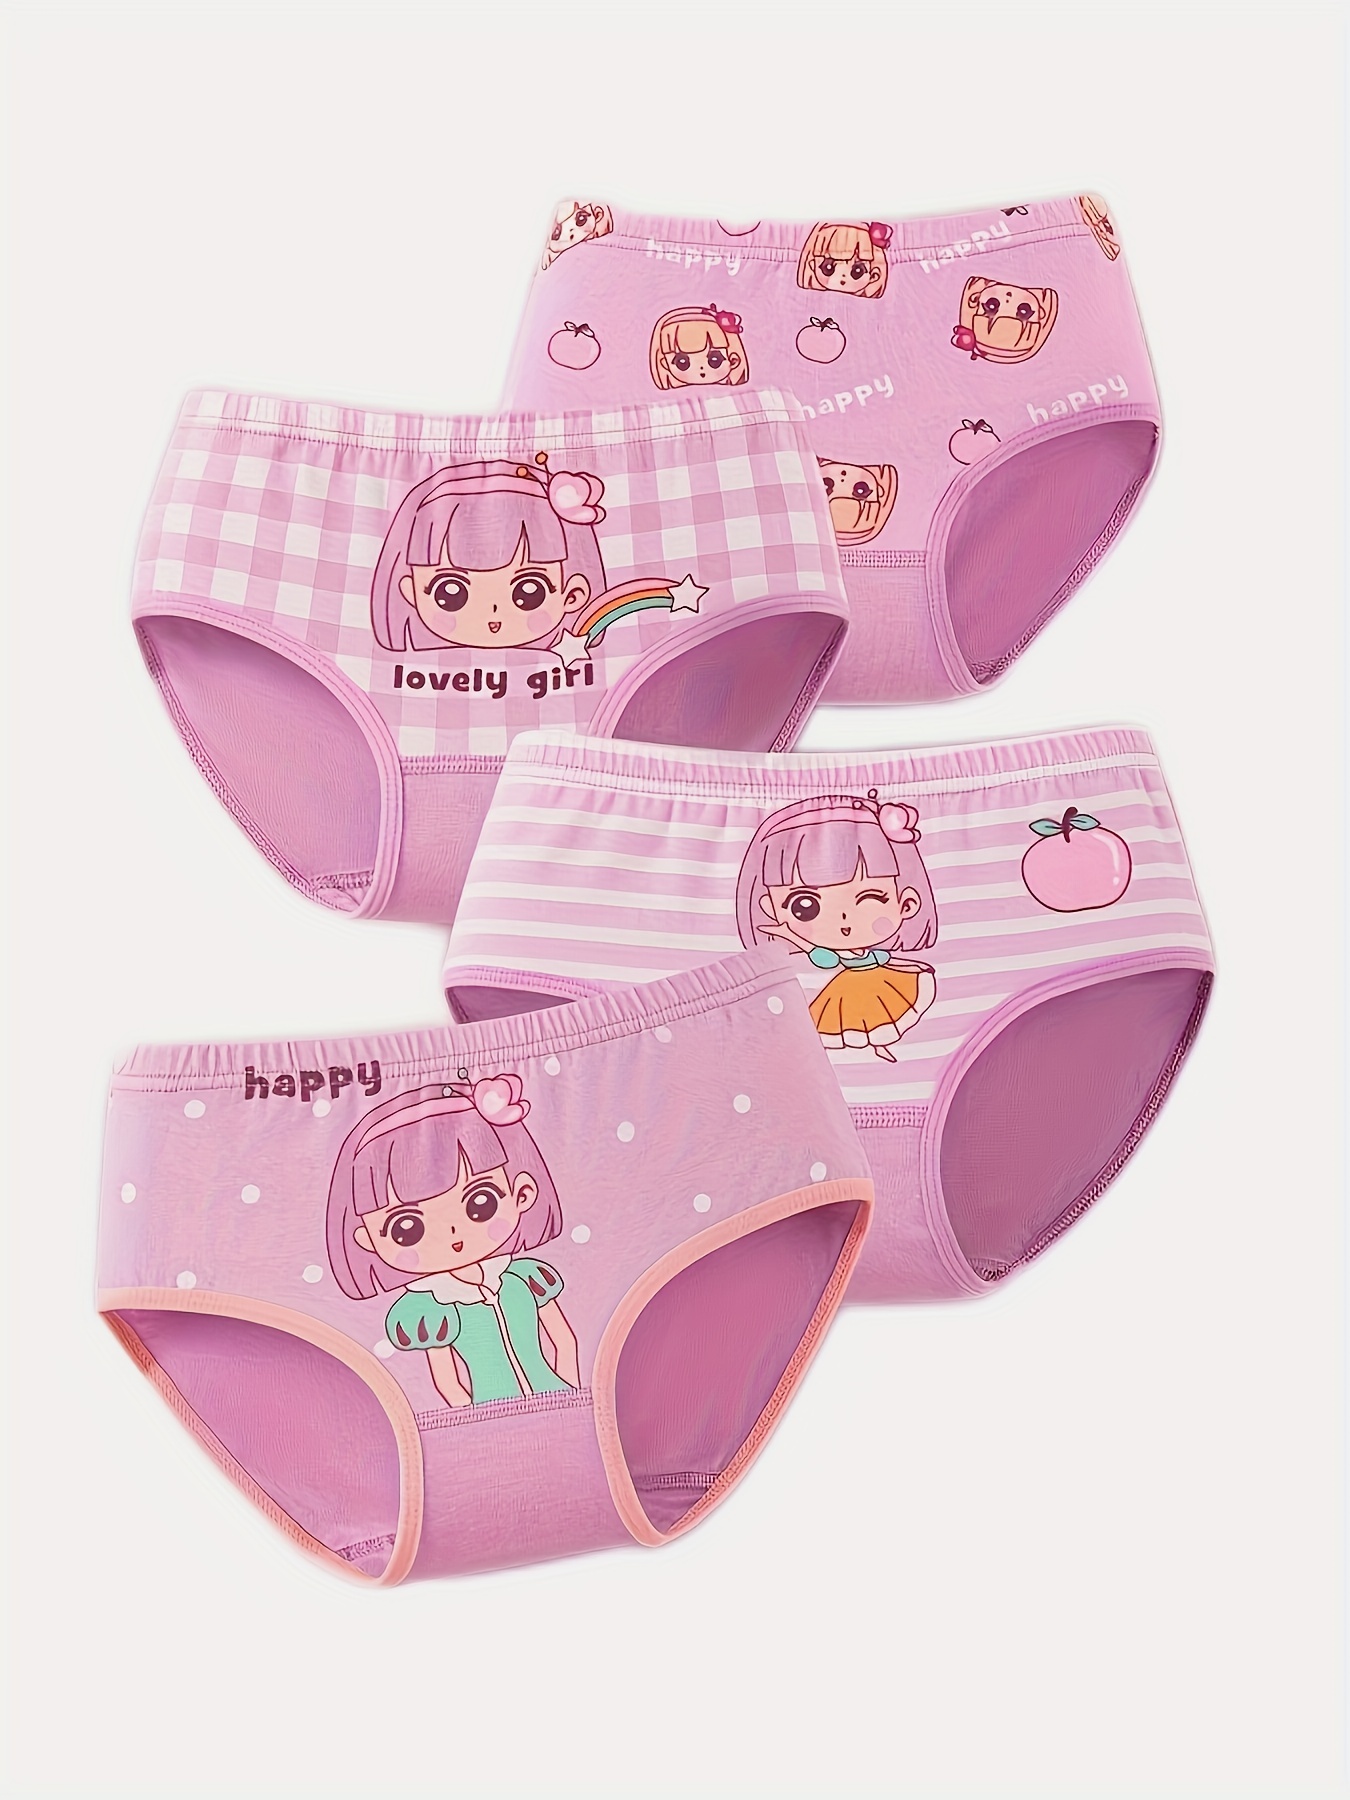 4pcs Comfortable Cotton Underwear for Girls Over 8 Years Old Hipster  Underpants 